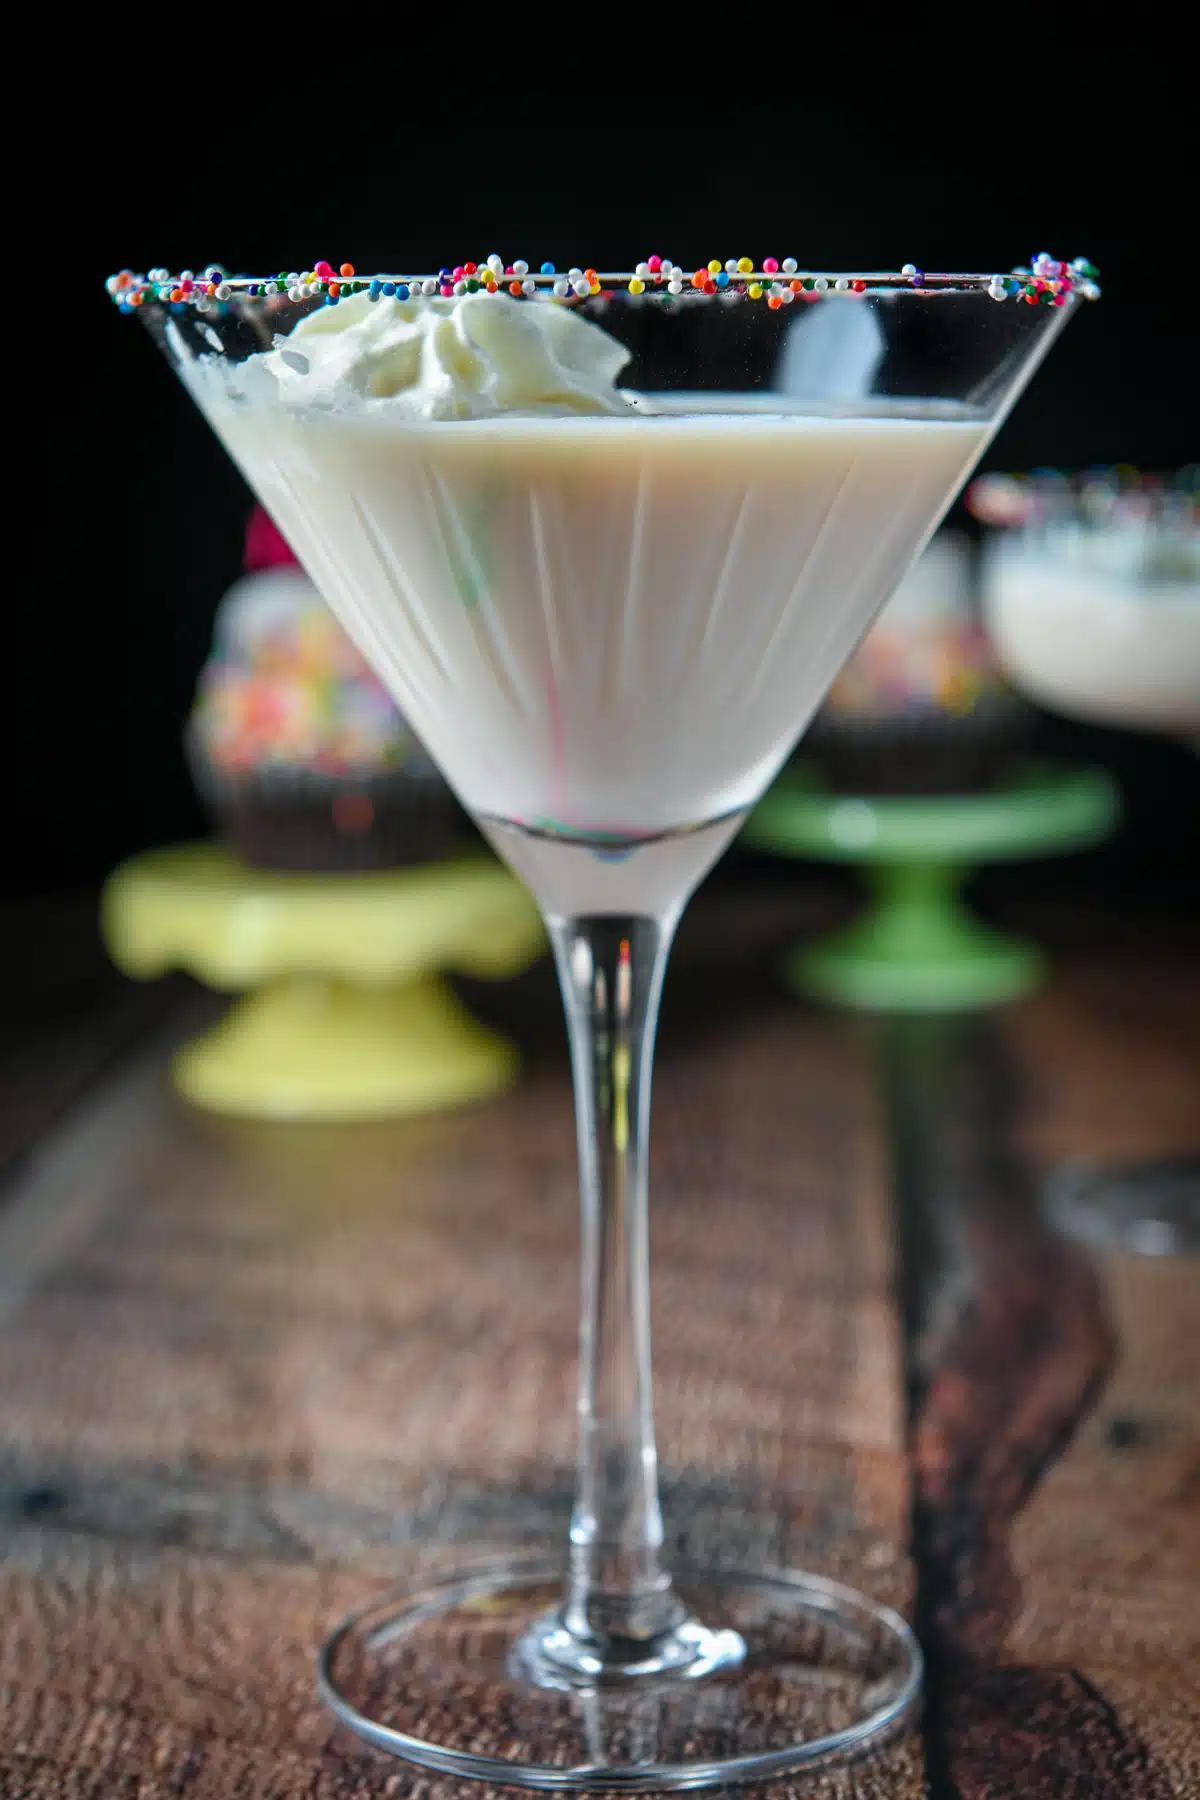 Close view of a martini view filled with the cream drink with whipped cream and colorful balls